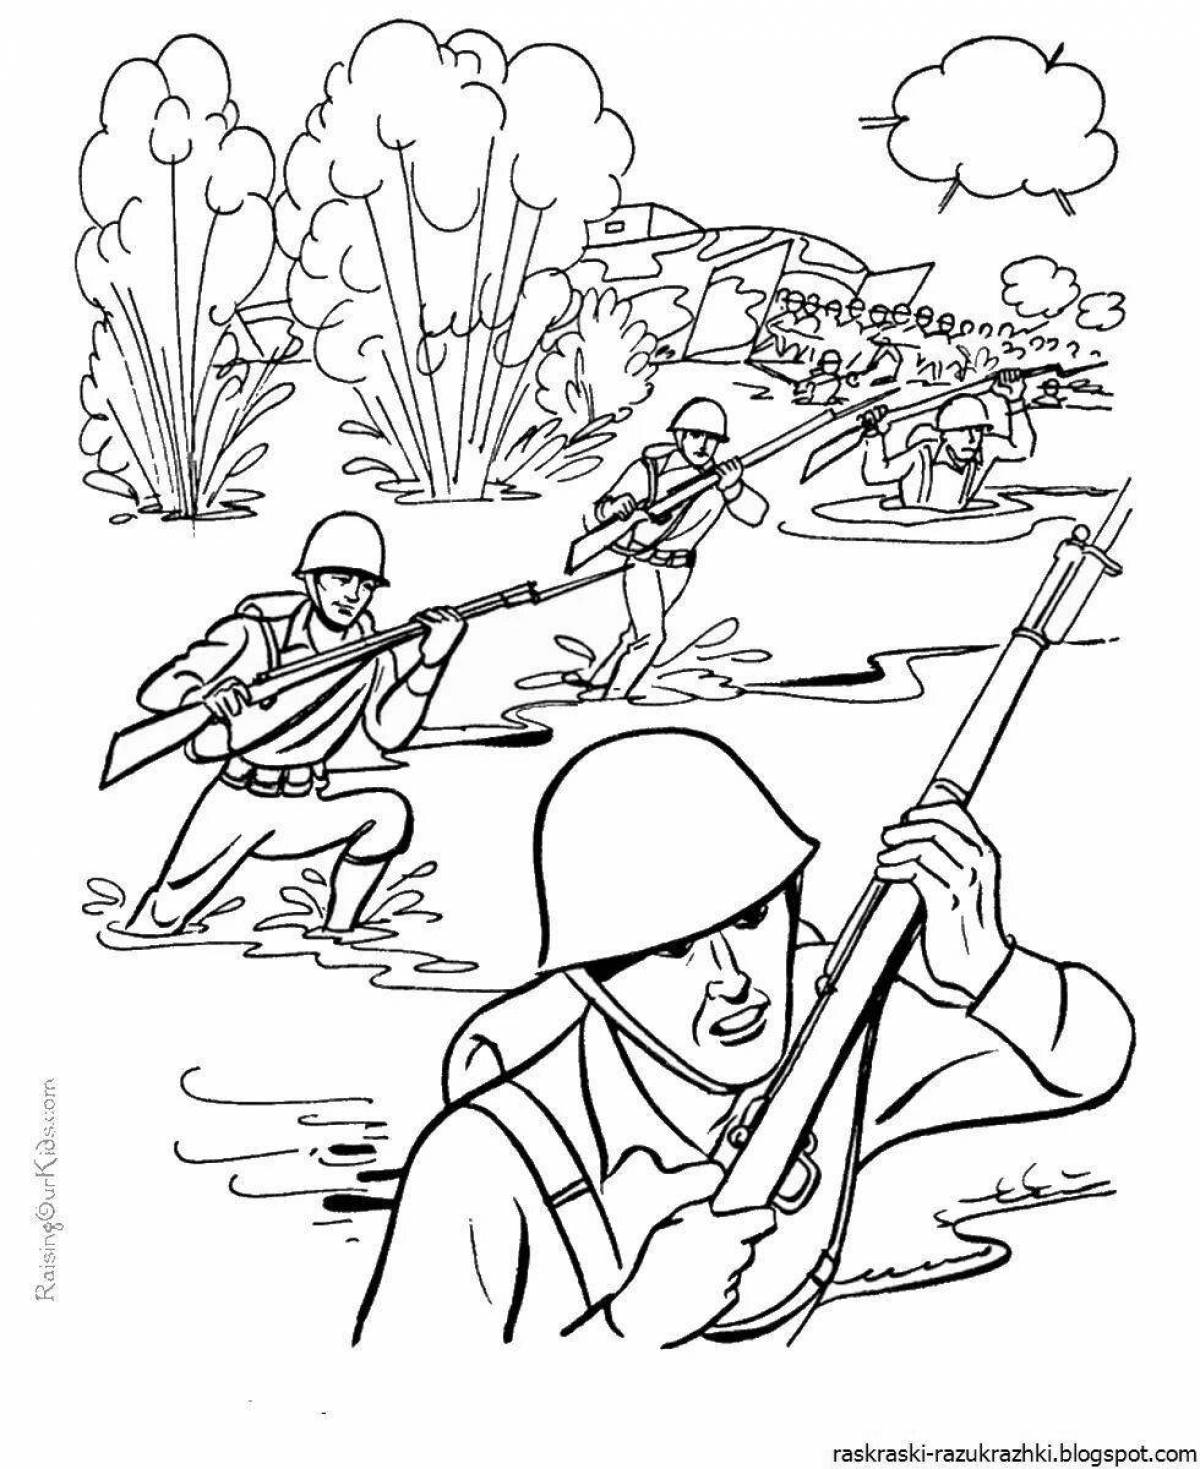 Nerving war coloring page